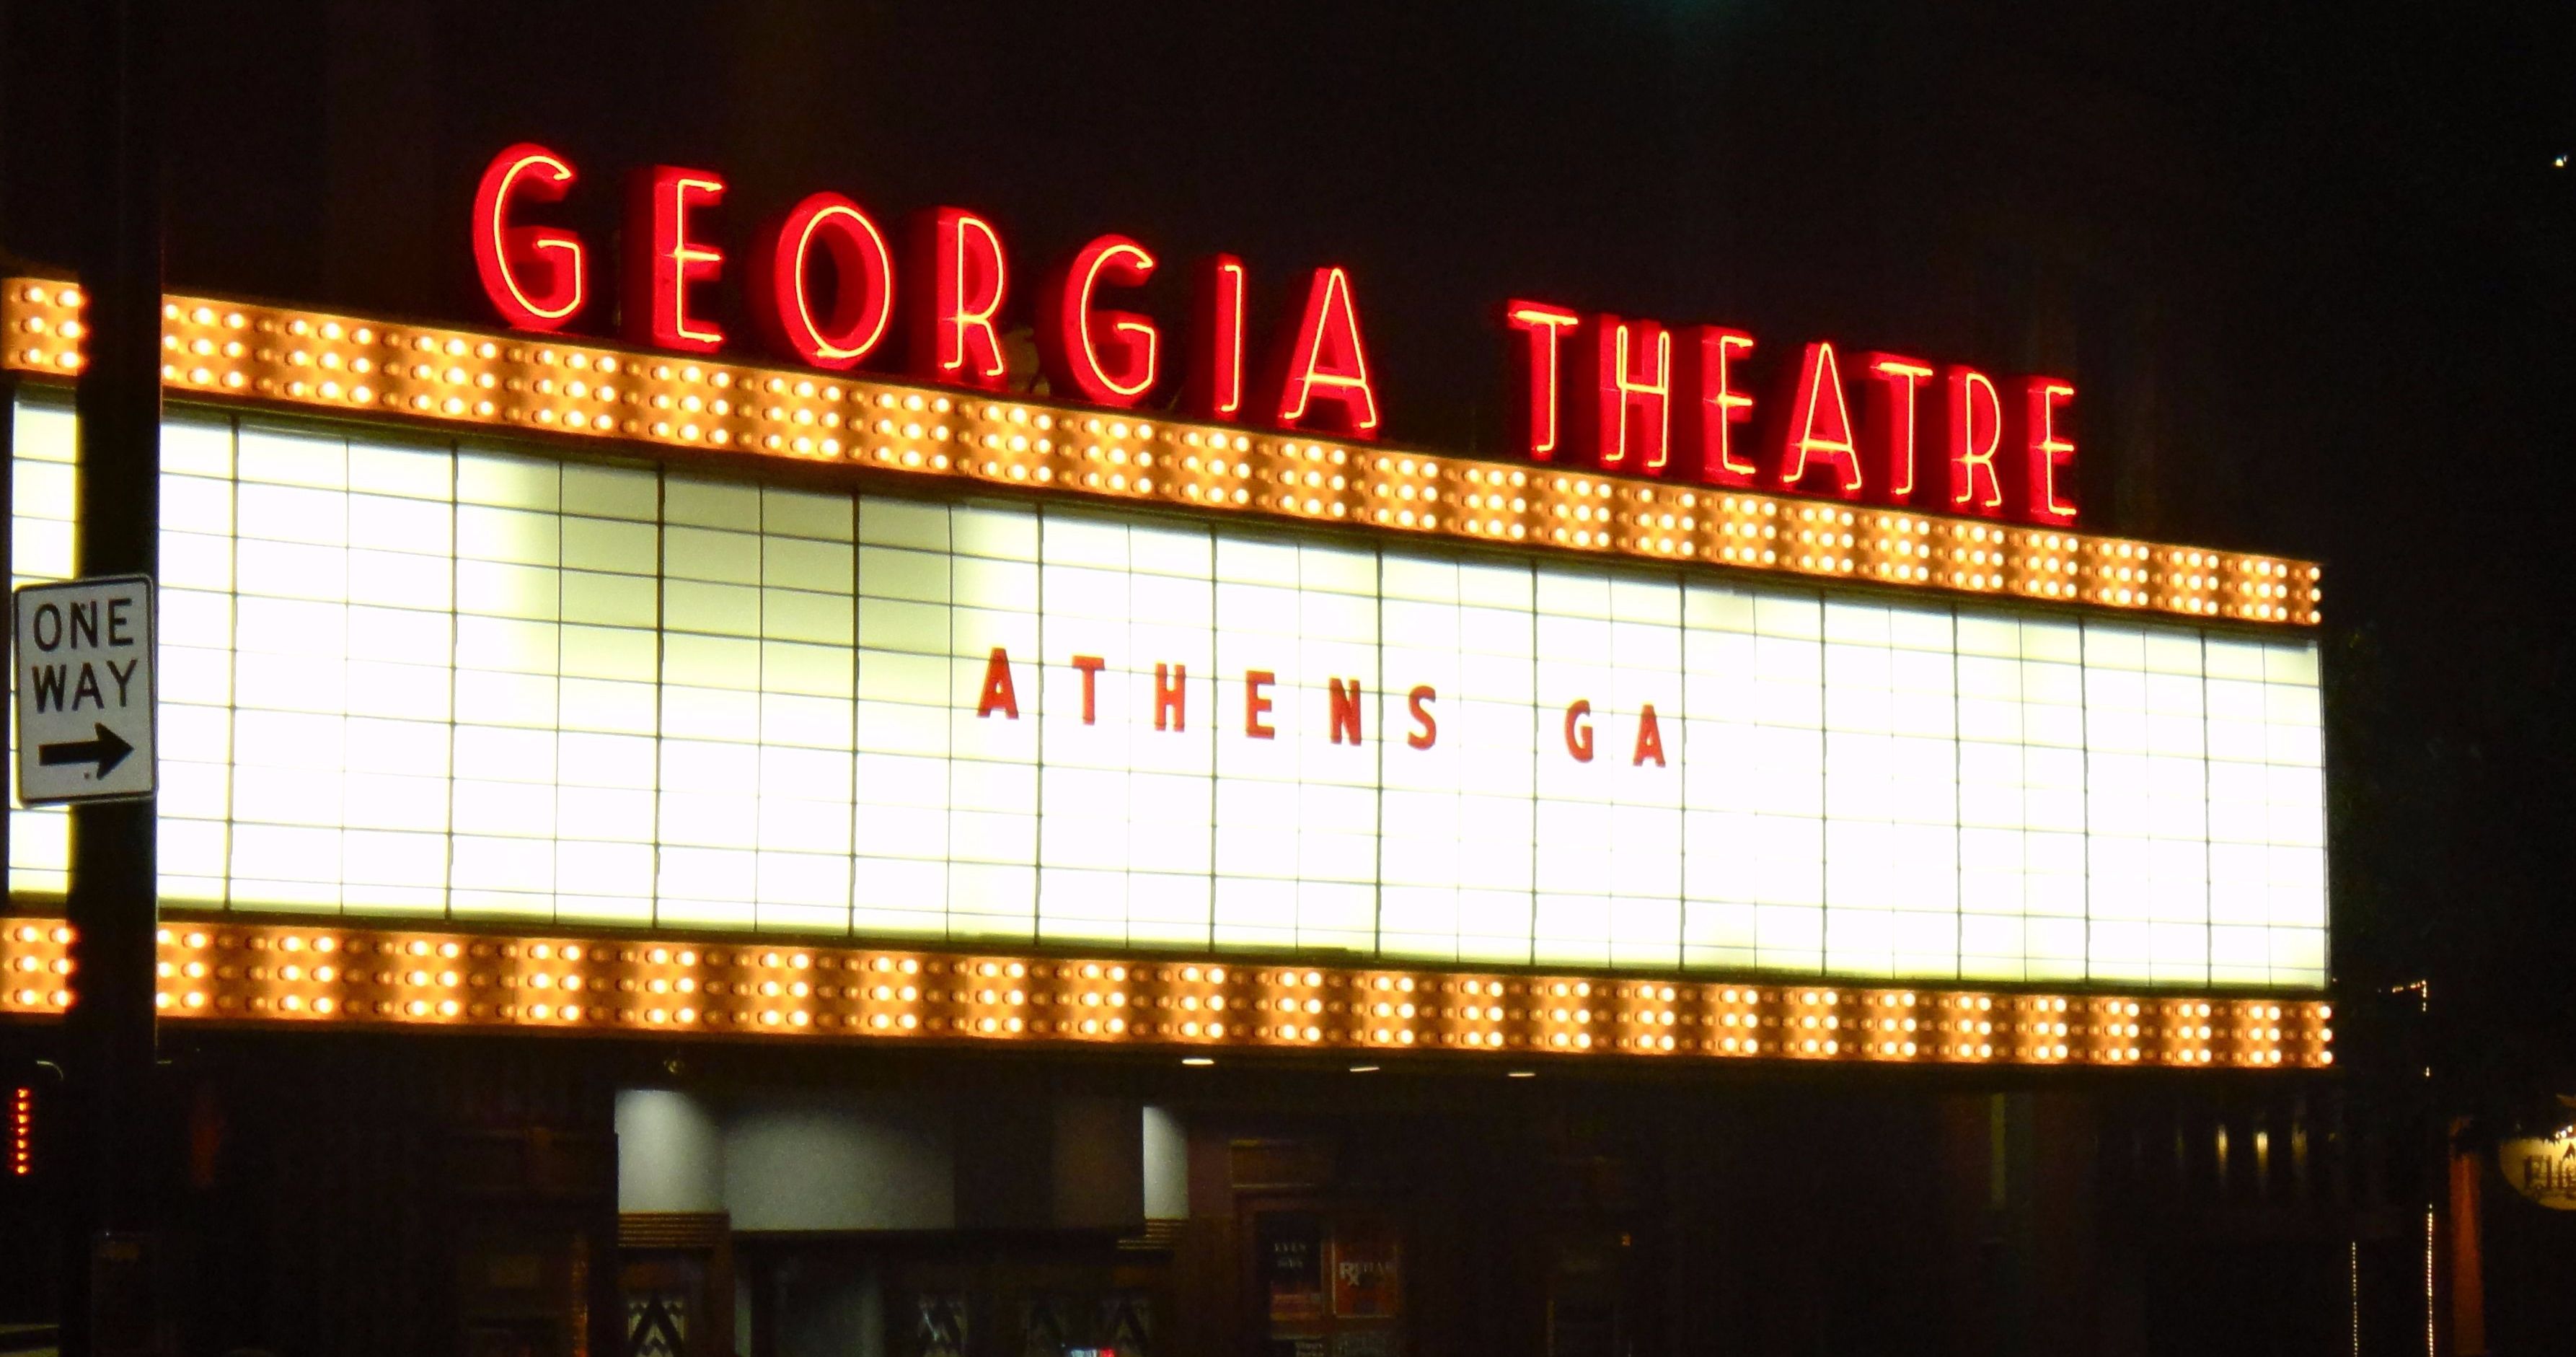 Georgia Movie Theaters Reopening Rules Announced